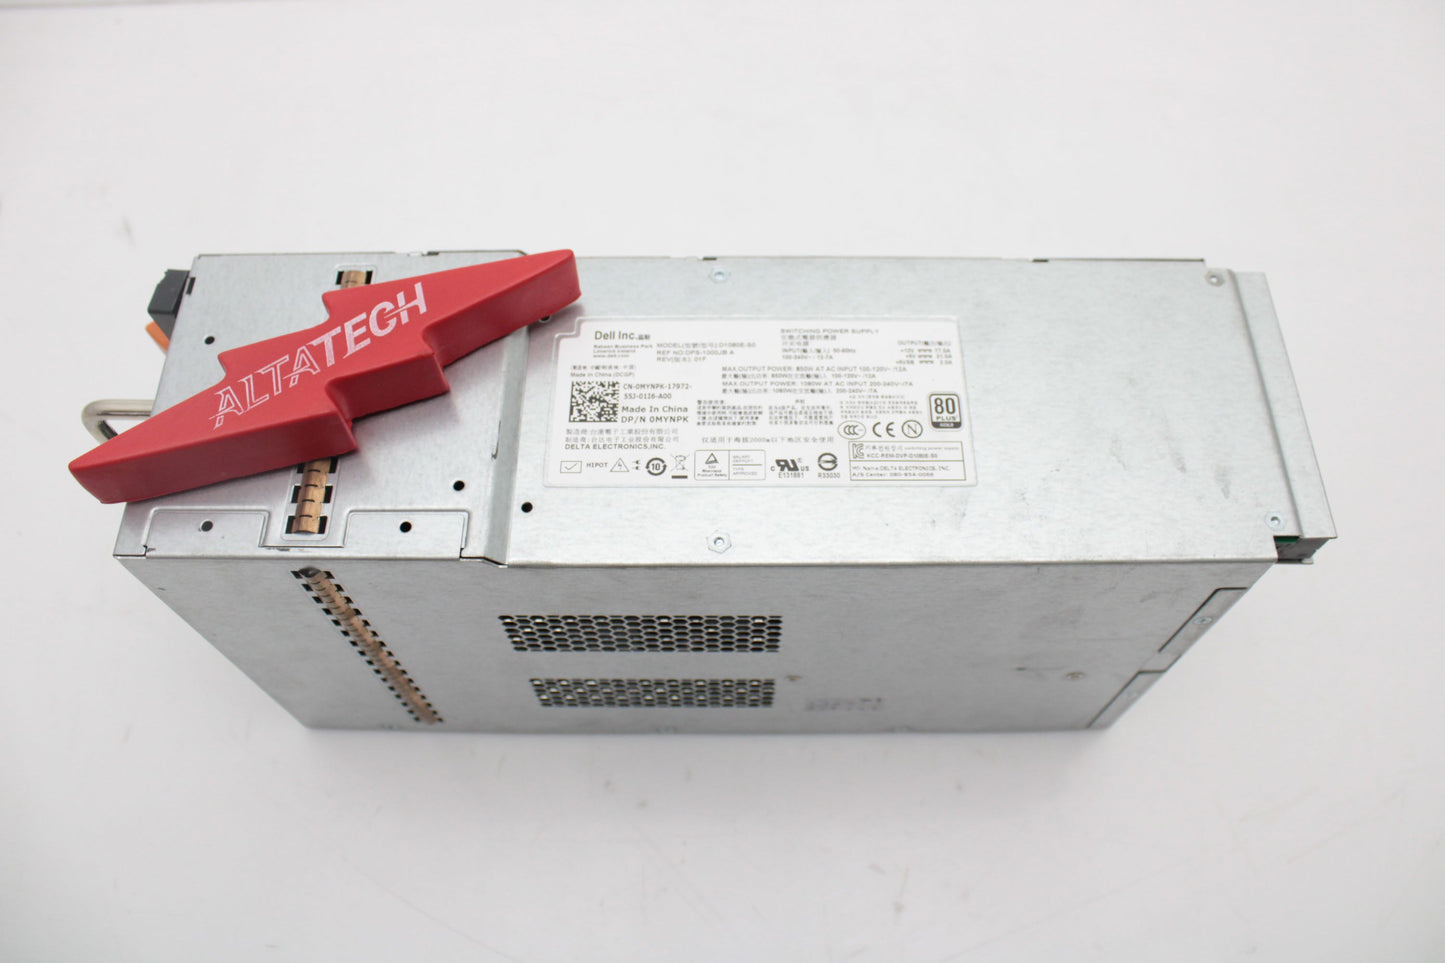 Dell MYNPK 1080W Power Supply AC PS6100, Used